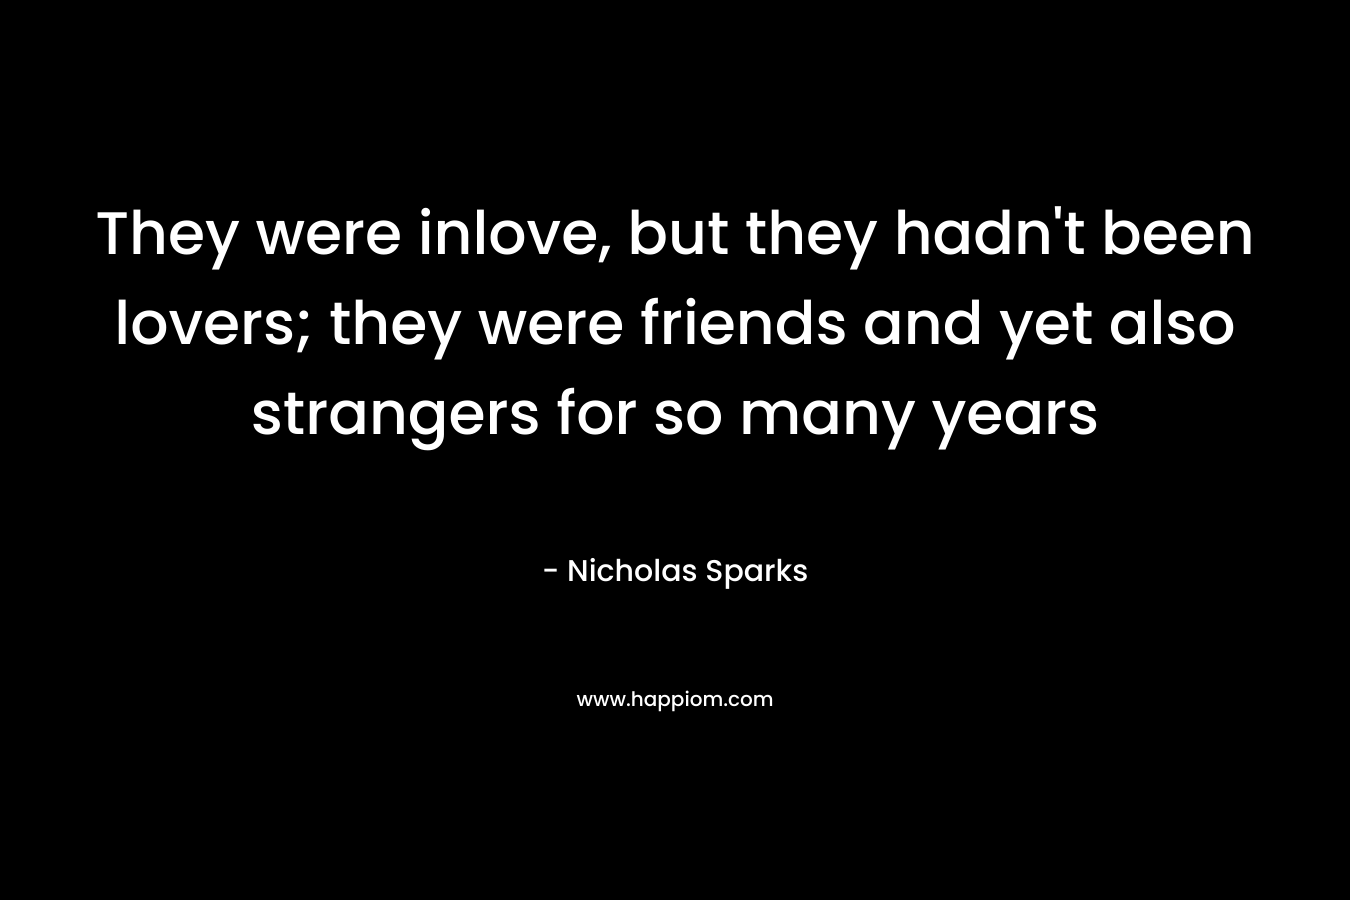 They were inlove, but they hadn’t been lovers; they were friends and yet also strangers for so many years – Nicholas Sparks